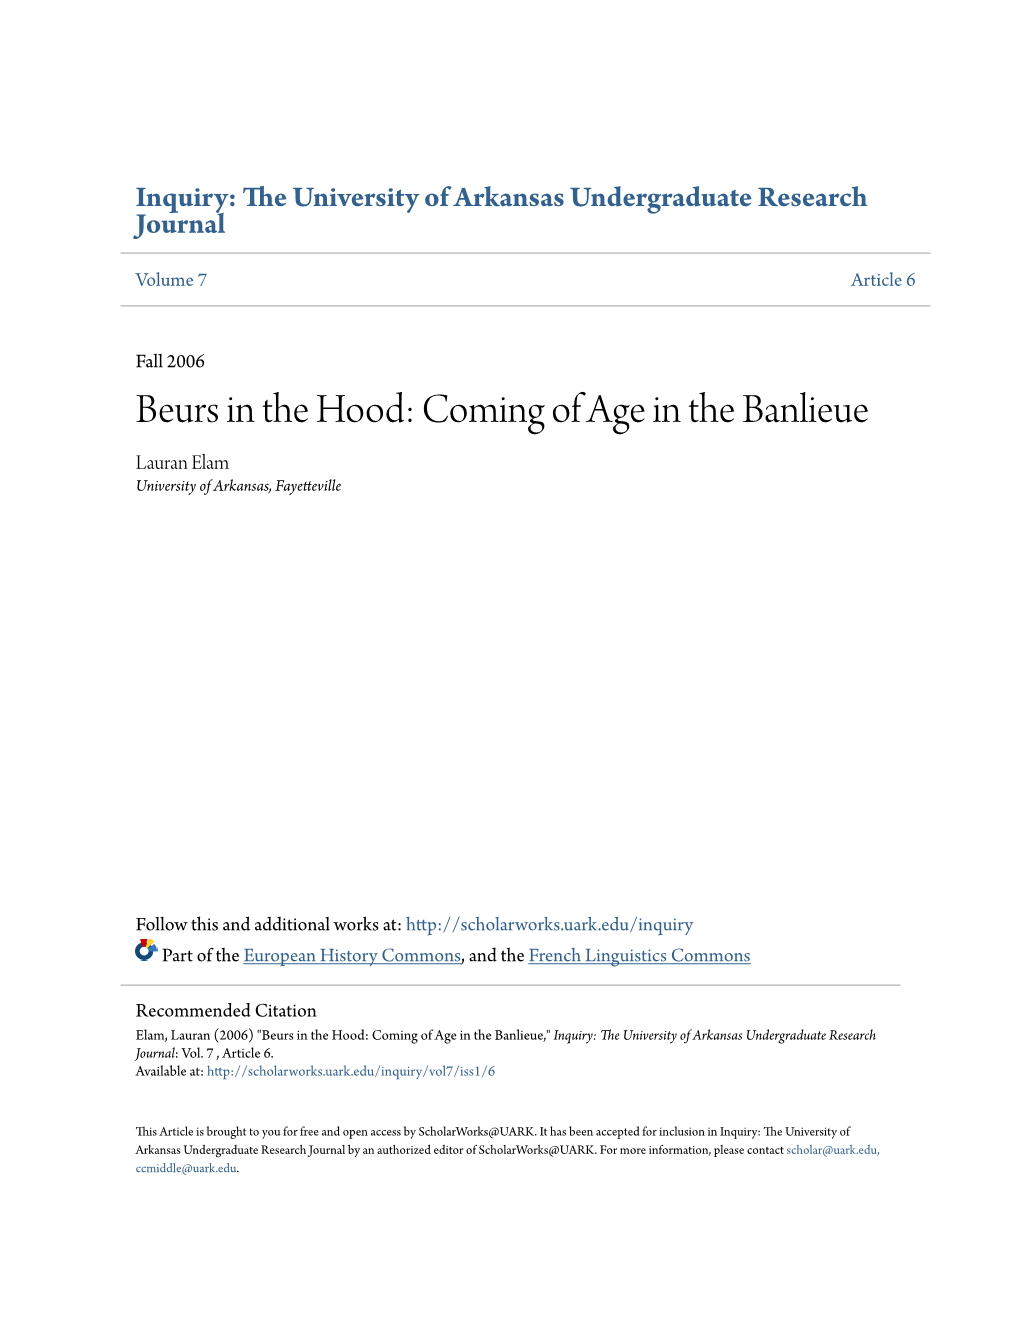 Beurs in the Hood: Coming of Age in the Banlieue Lauran Elam University of Arkansas, Fayetteville